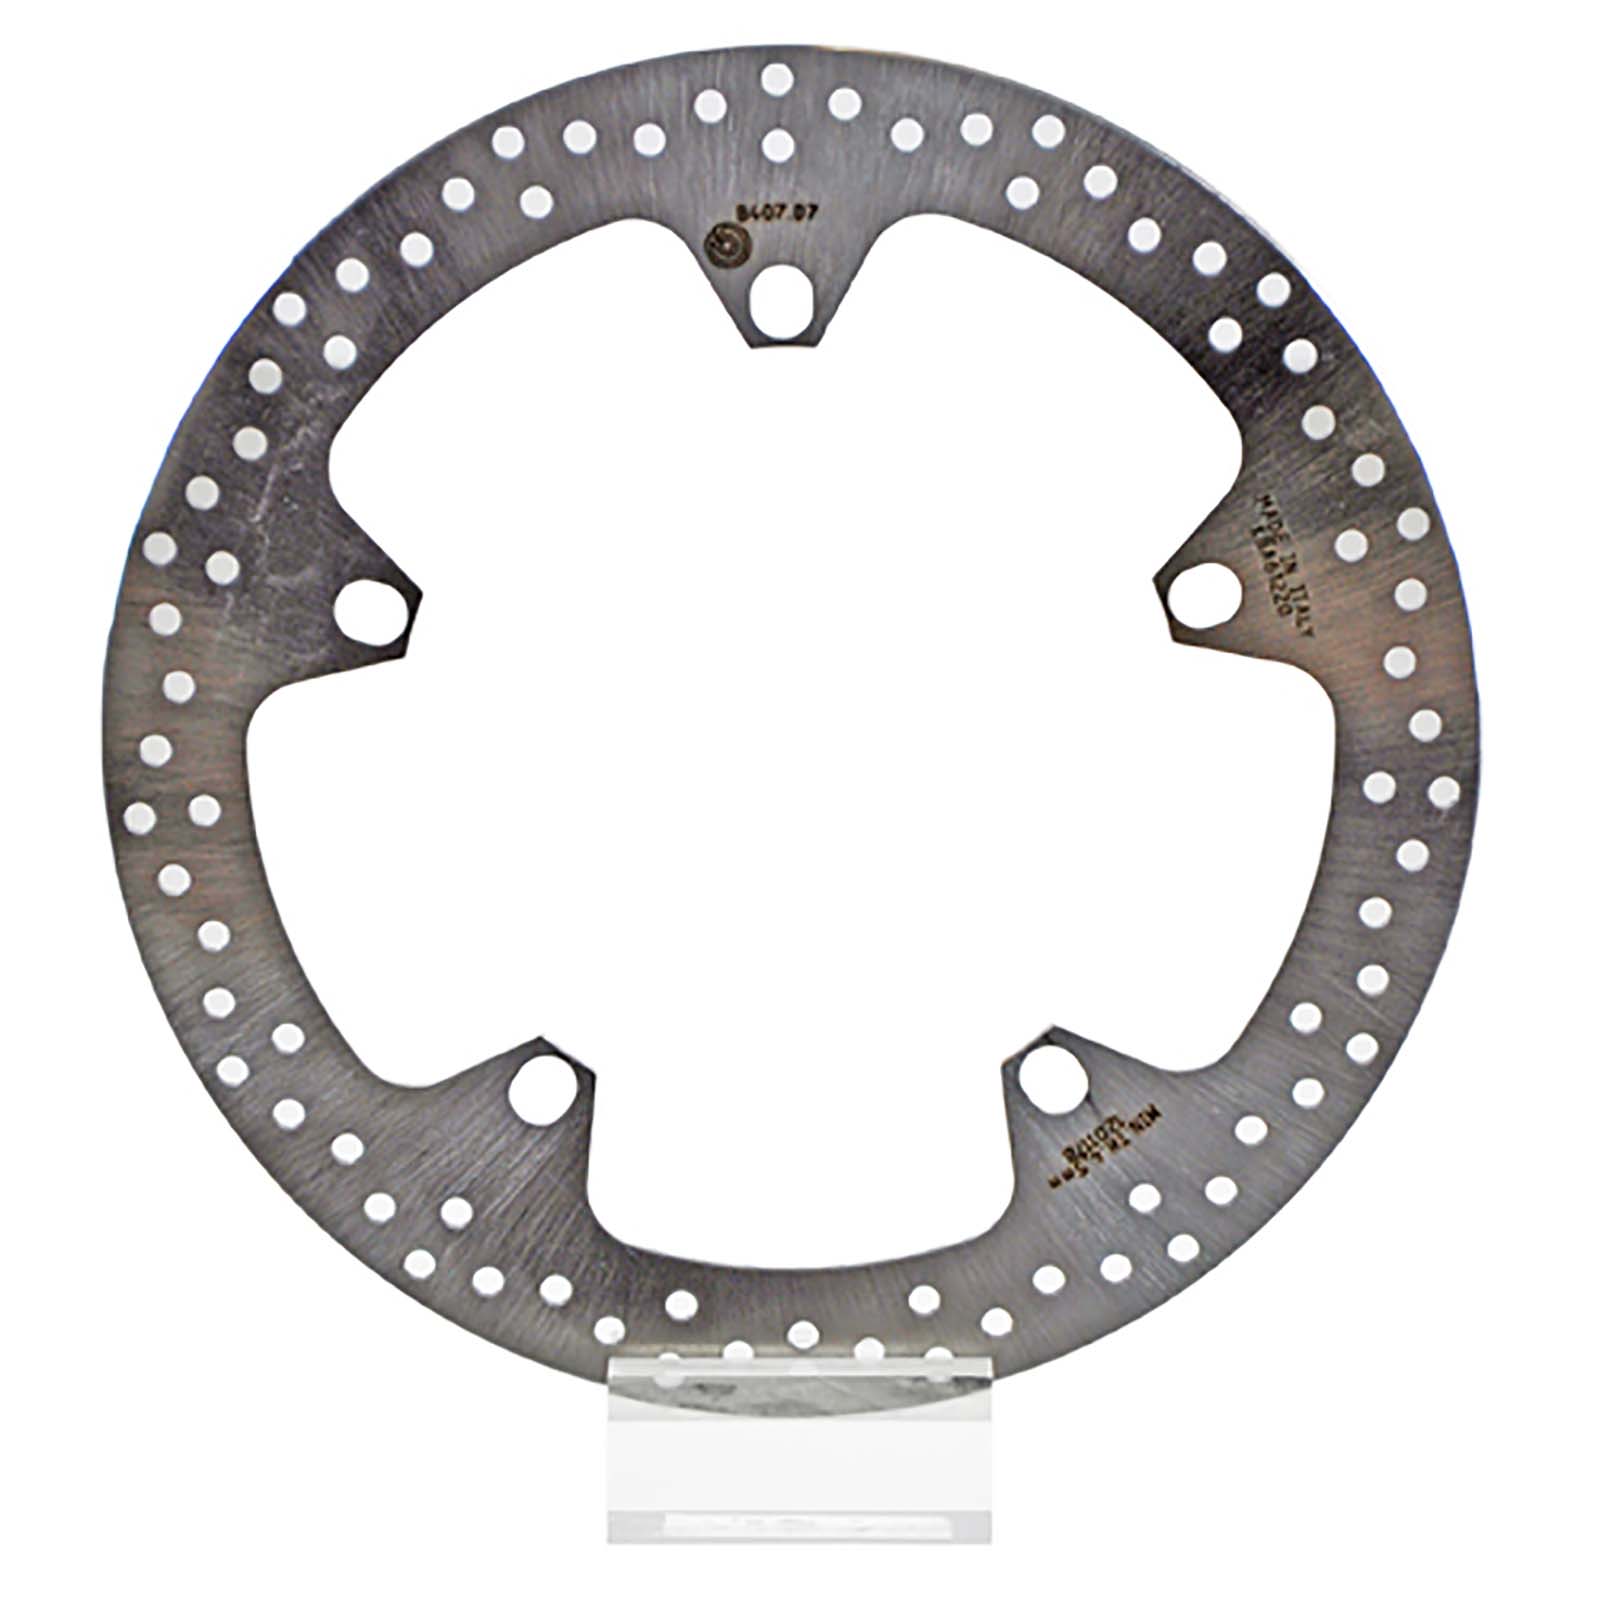 BREMBO SERIE-ORO-QUALITY BRAKE DISC FIXED FRONT BMW R 1200 RT 05-07